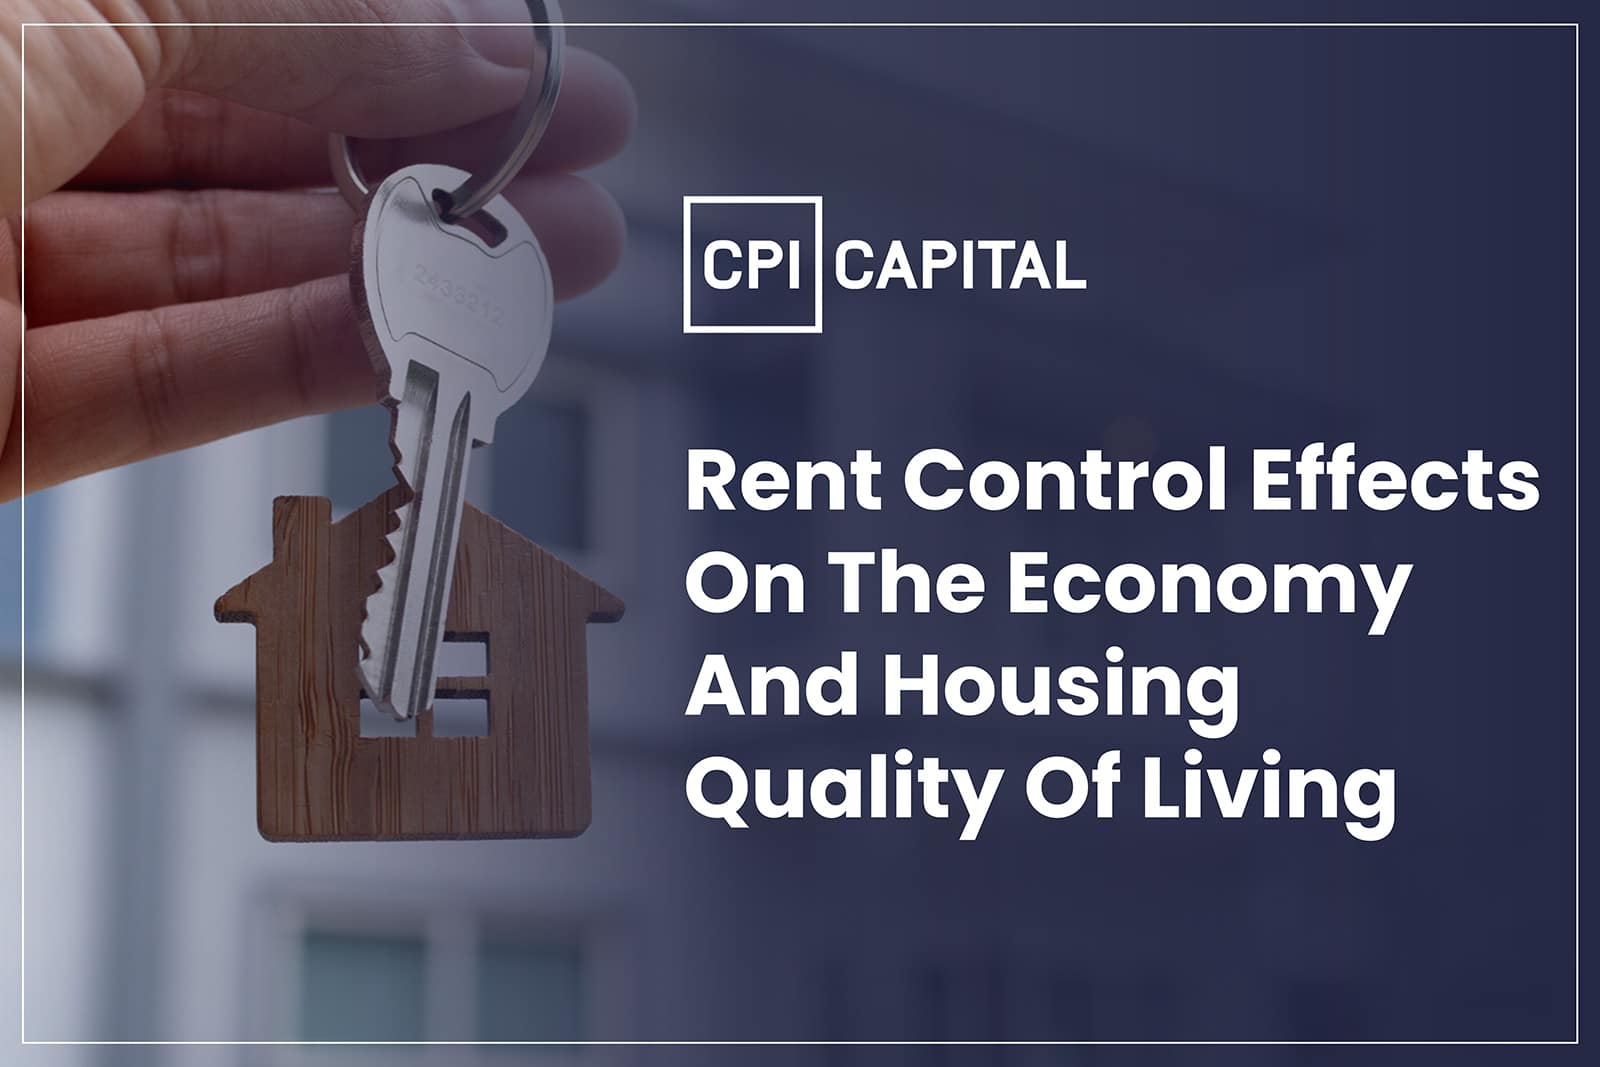 Rent control effects on the economy and housing quality